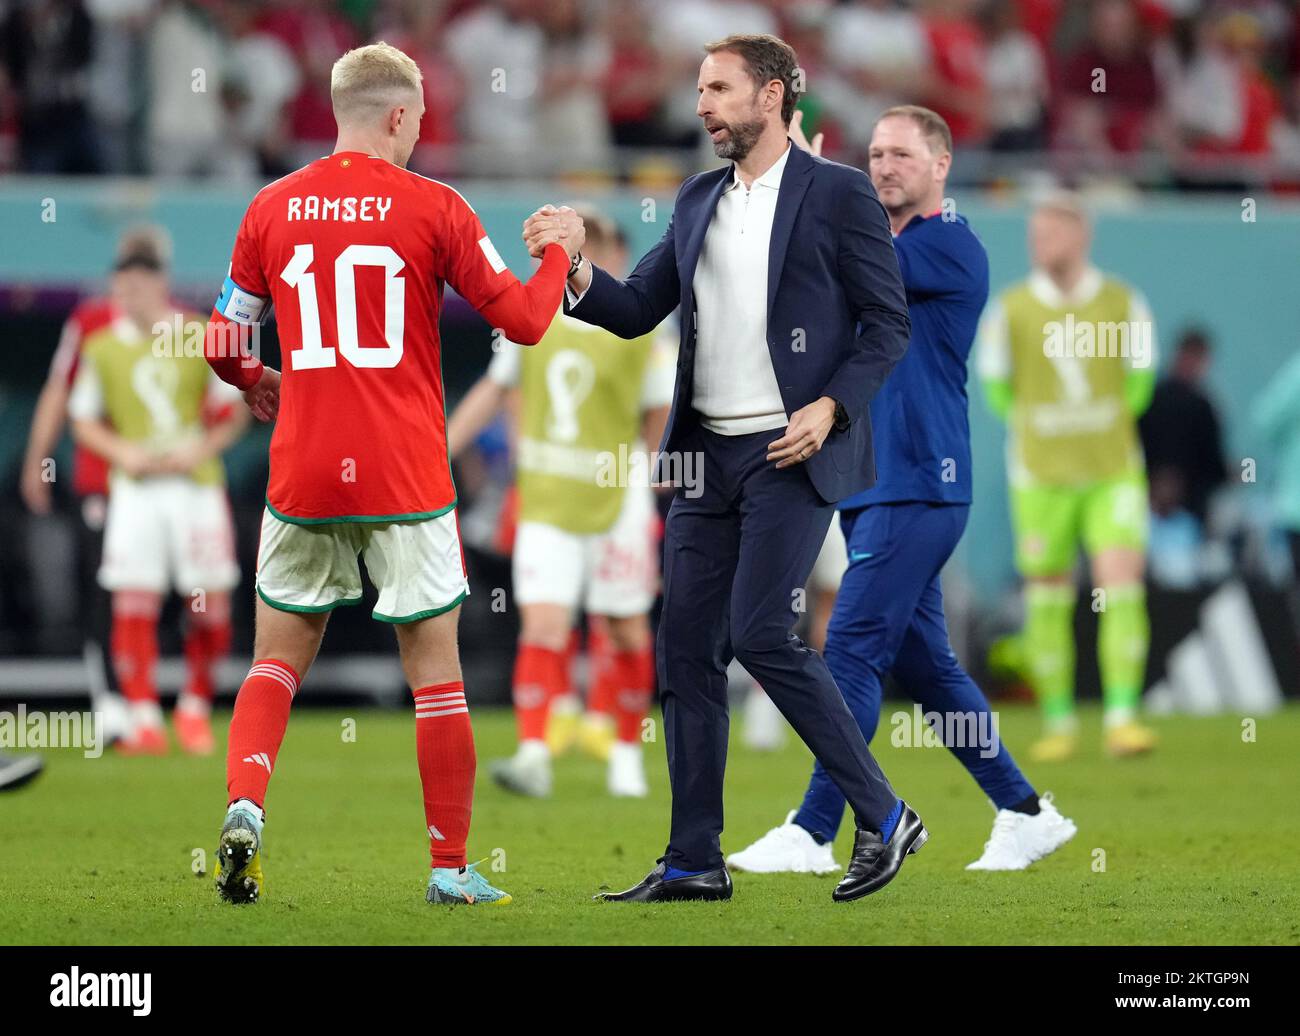 England manager Gareth Southgate with Wales' Aaron Ramsey following the FIFA World Cup Group B match at the Ahmad Bin Ali Stadium, Al Rayyan, Qatar. Picture date: Tuesday November 29, 2022. Stock Photo